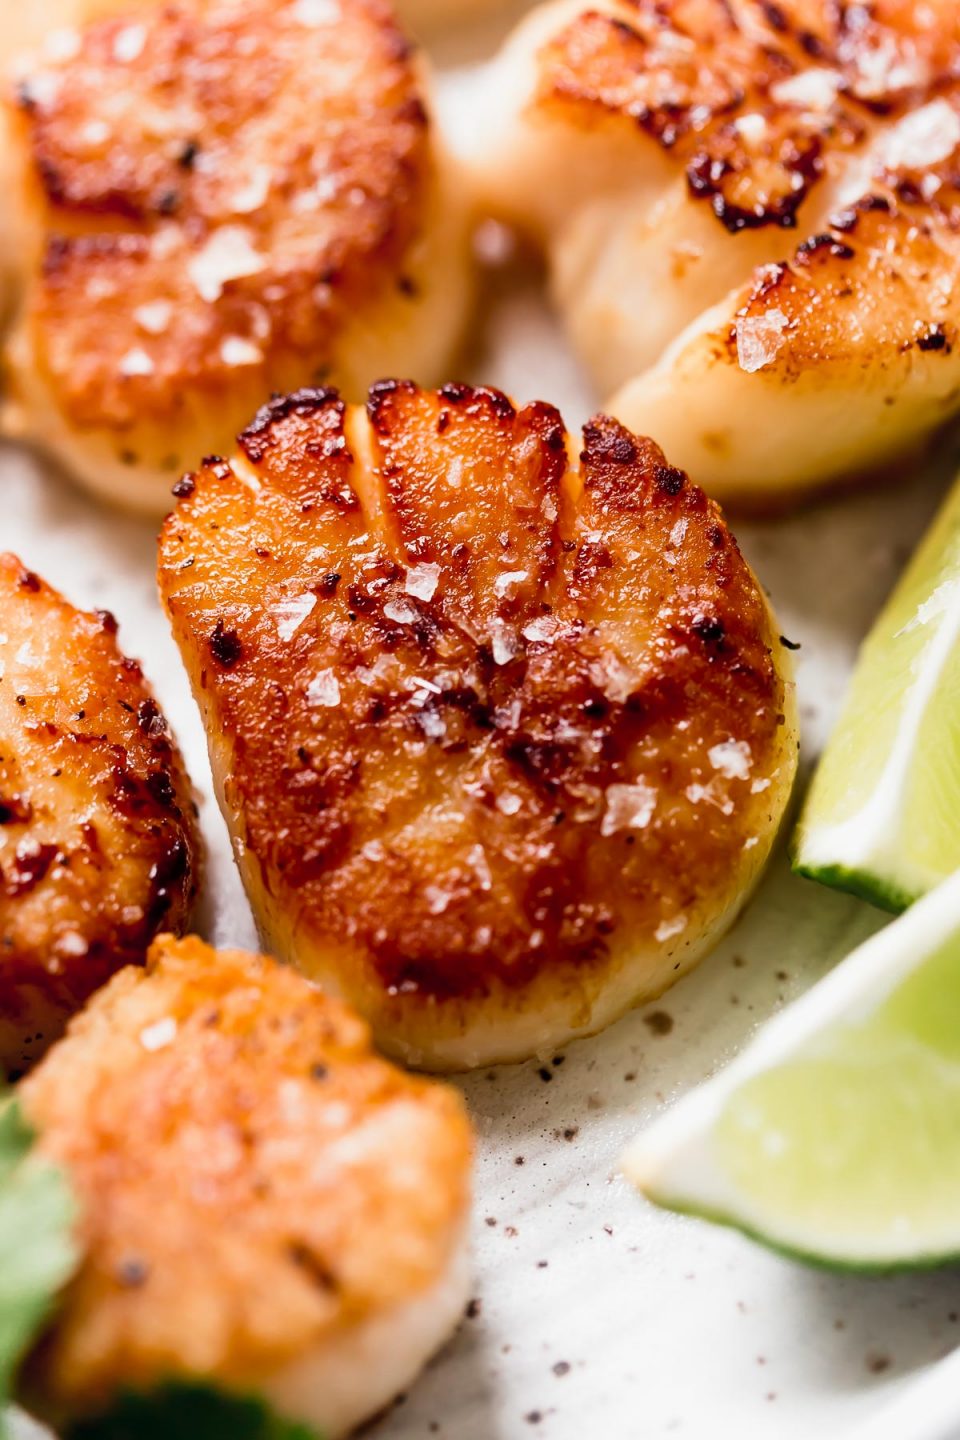 Seared scallop on a small white plate, ready to be served with coconut rice & mango salsa.